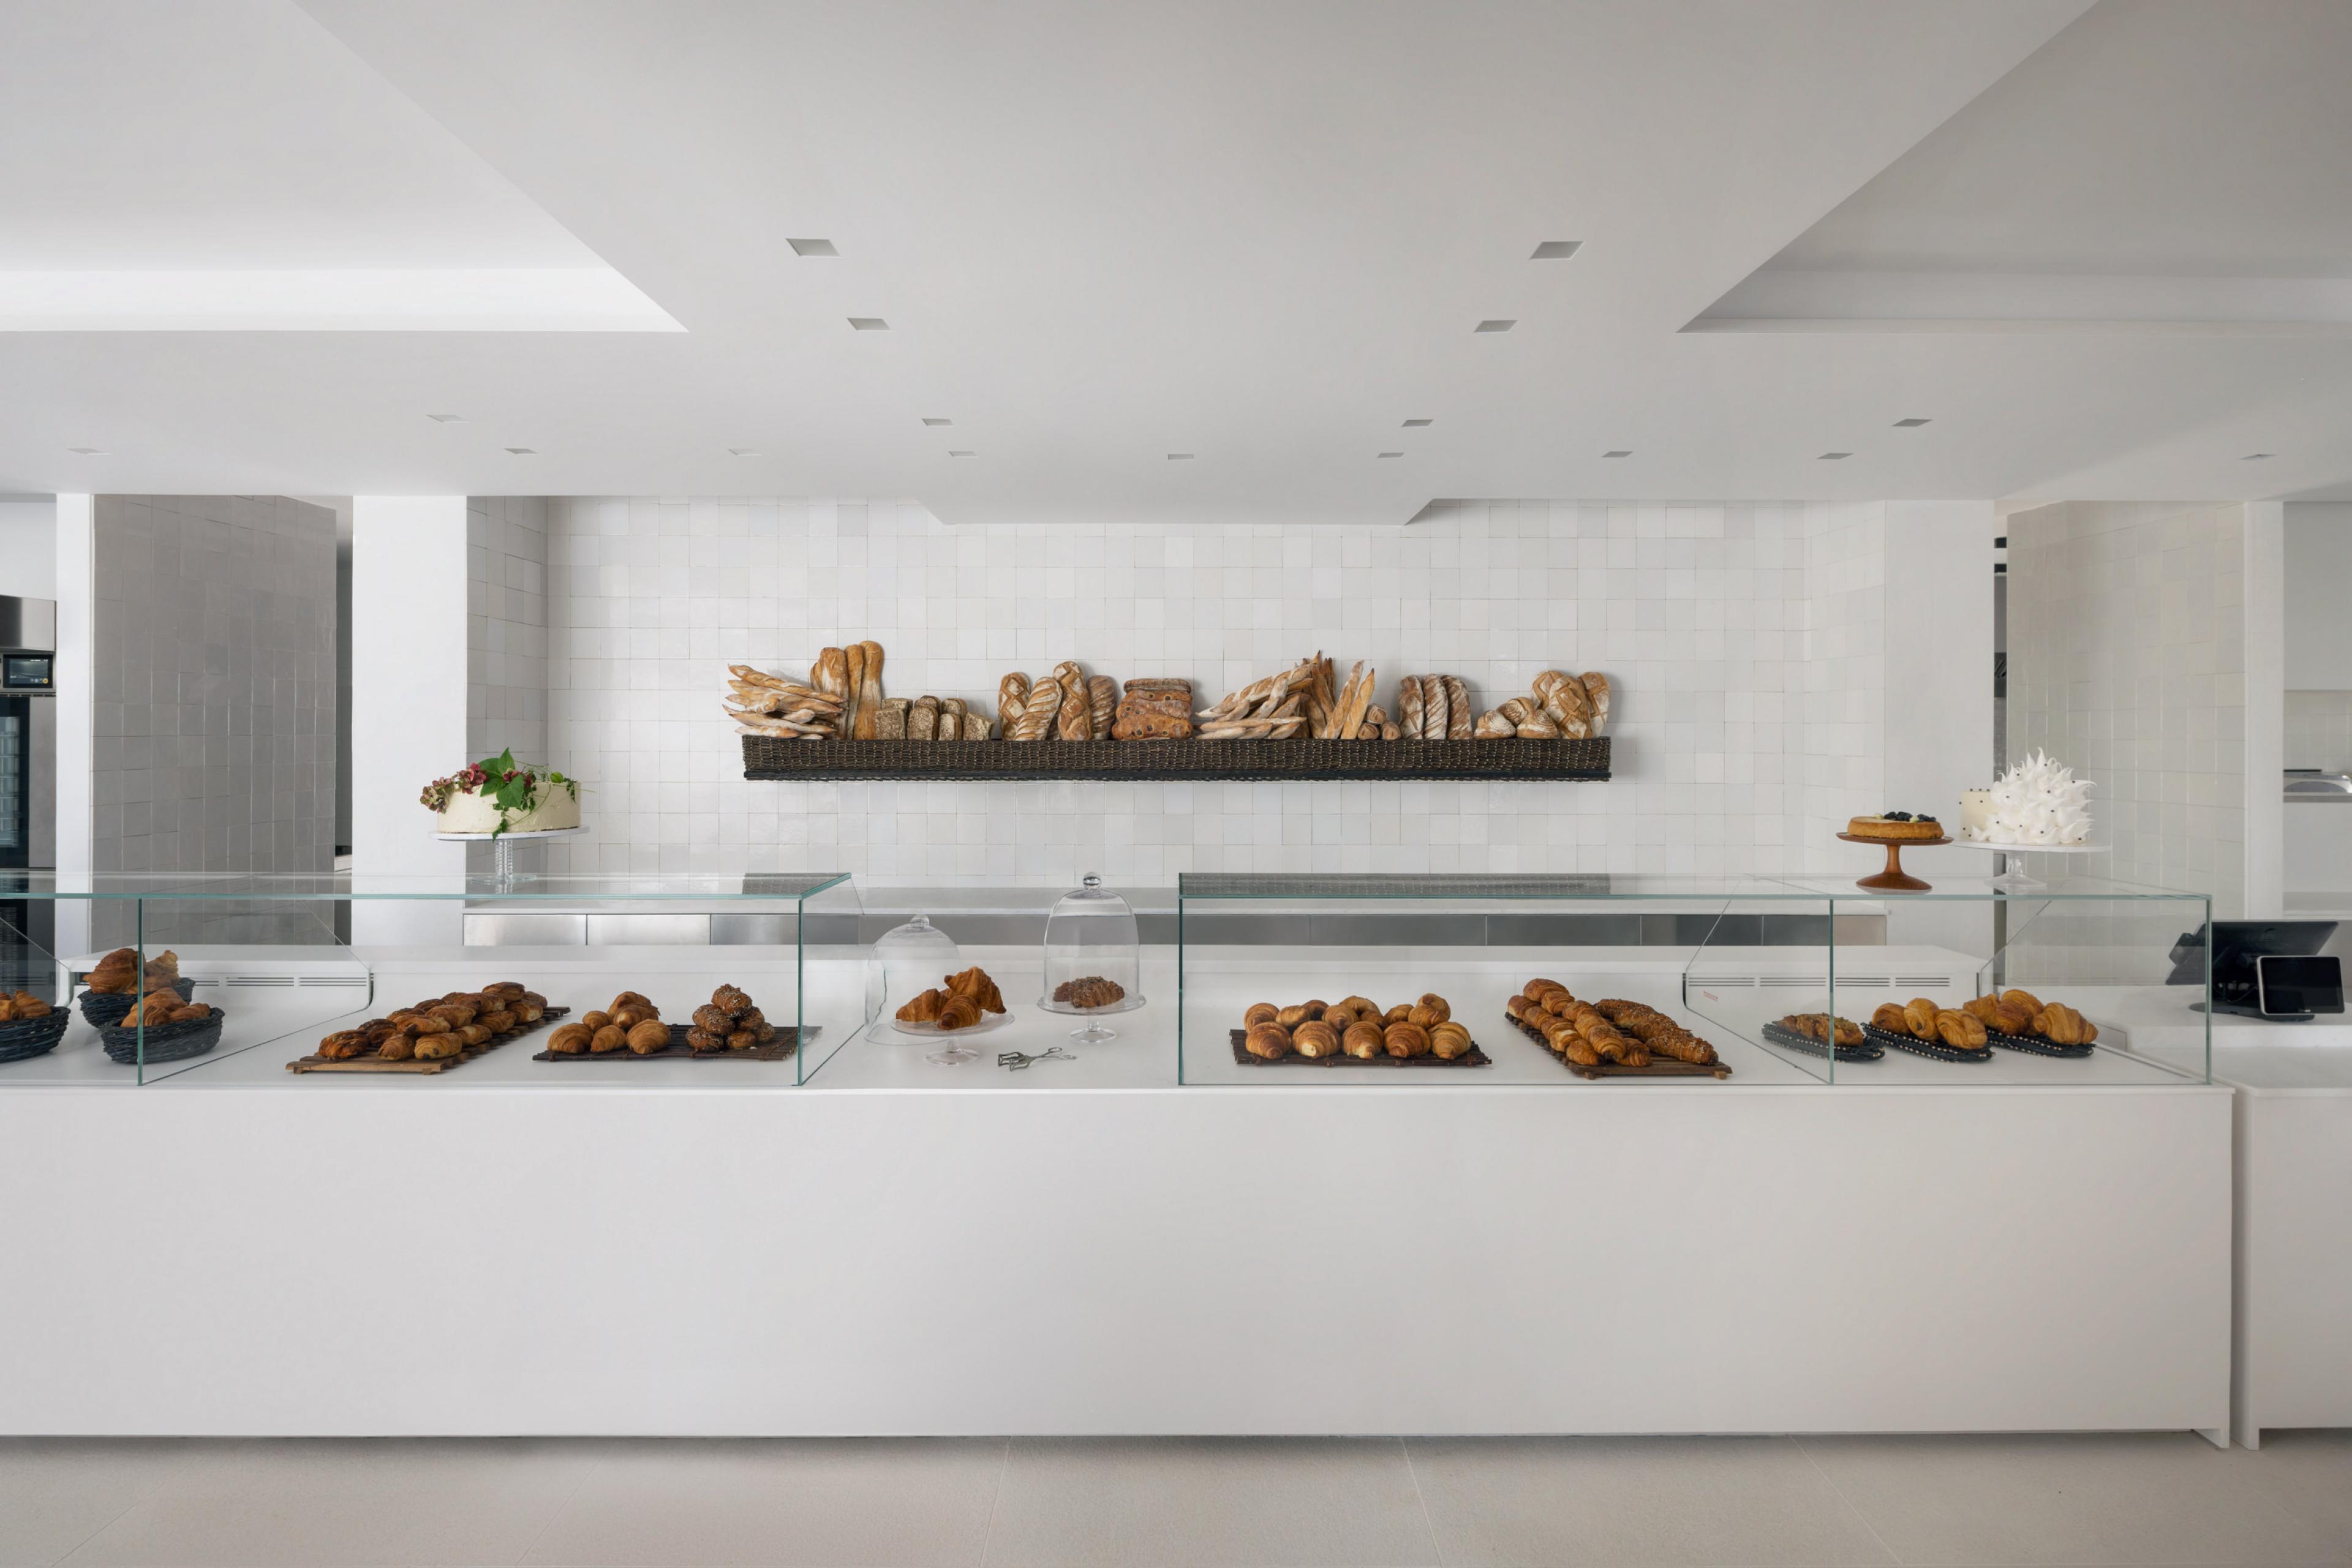 minimalist interior of a white-walled bakery displaying artisinal breads against wall